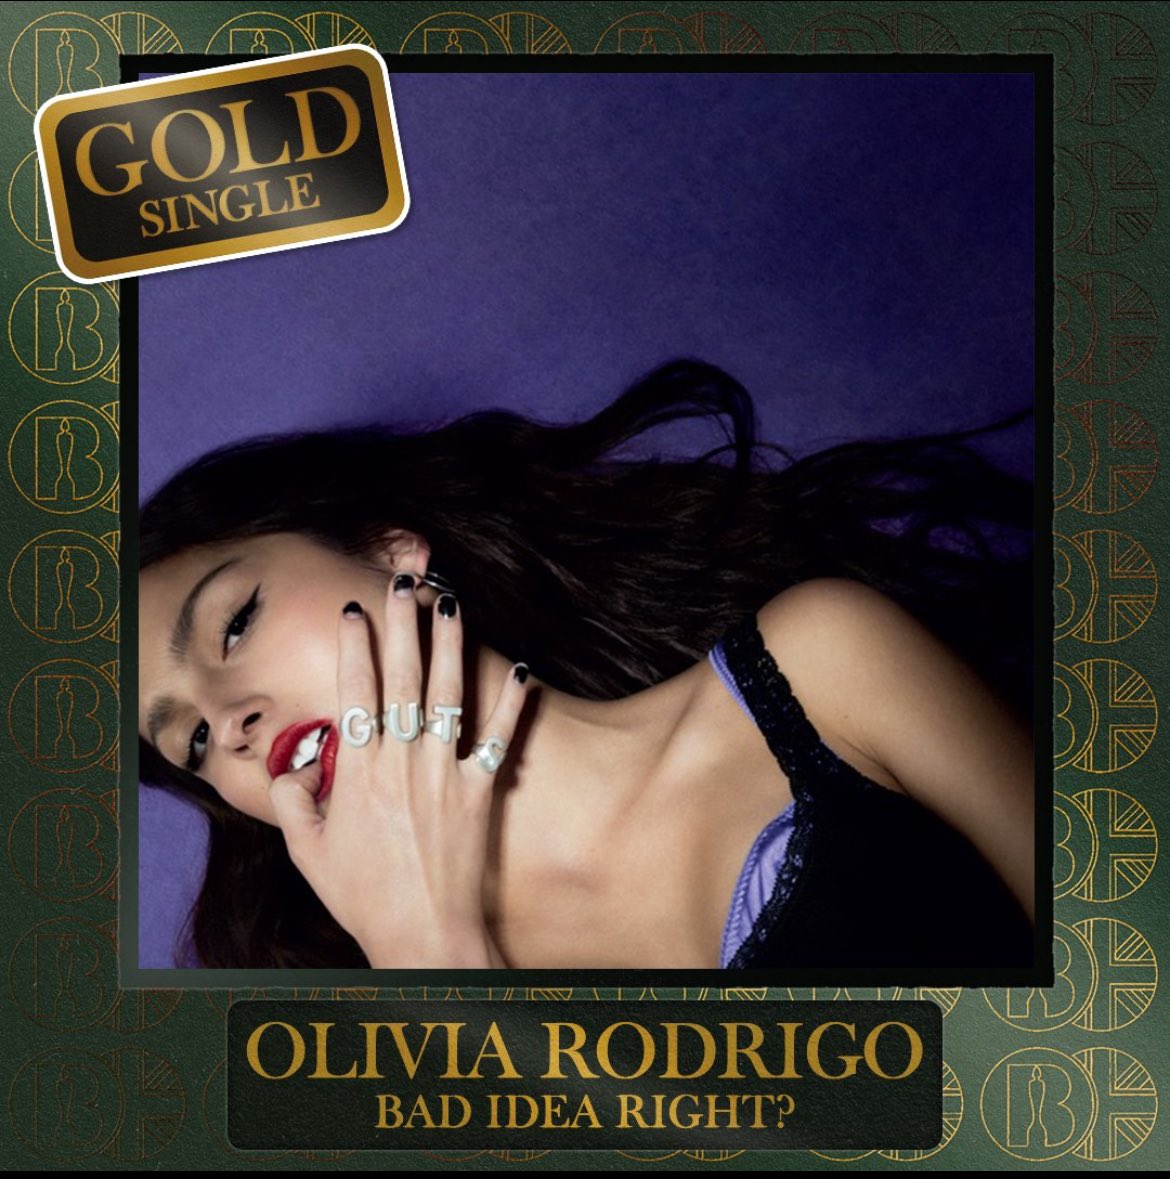 bad idea right has now been certified GOLD in the UK!! 🎉💟

this means that the song has sold 400,000 units in the country 🦋

congratulations to olivia ❤️

#OliviaRodrigo #GUTS #SOUR
#badidearight #charts